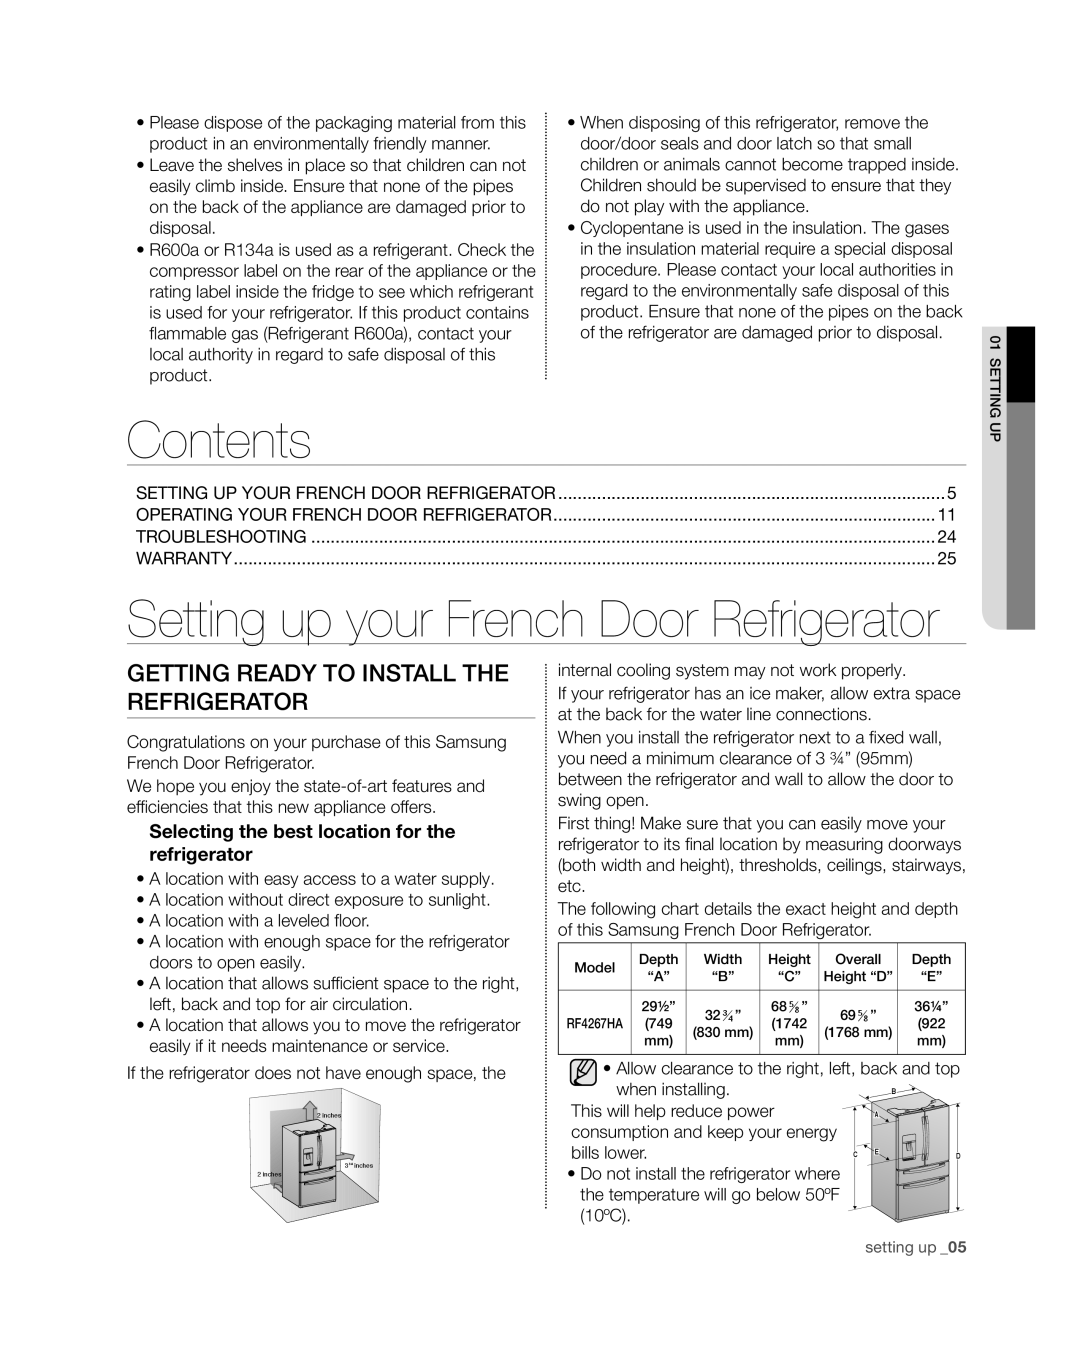 Samsung RF4267HA user manual Contents, Setting up your French Door Refrigerator, Getting ready to install the refrigerator 